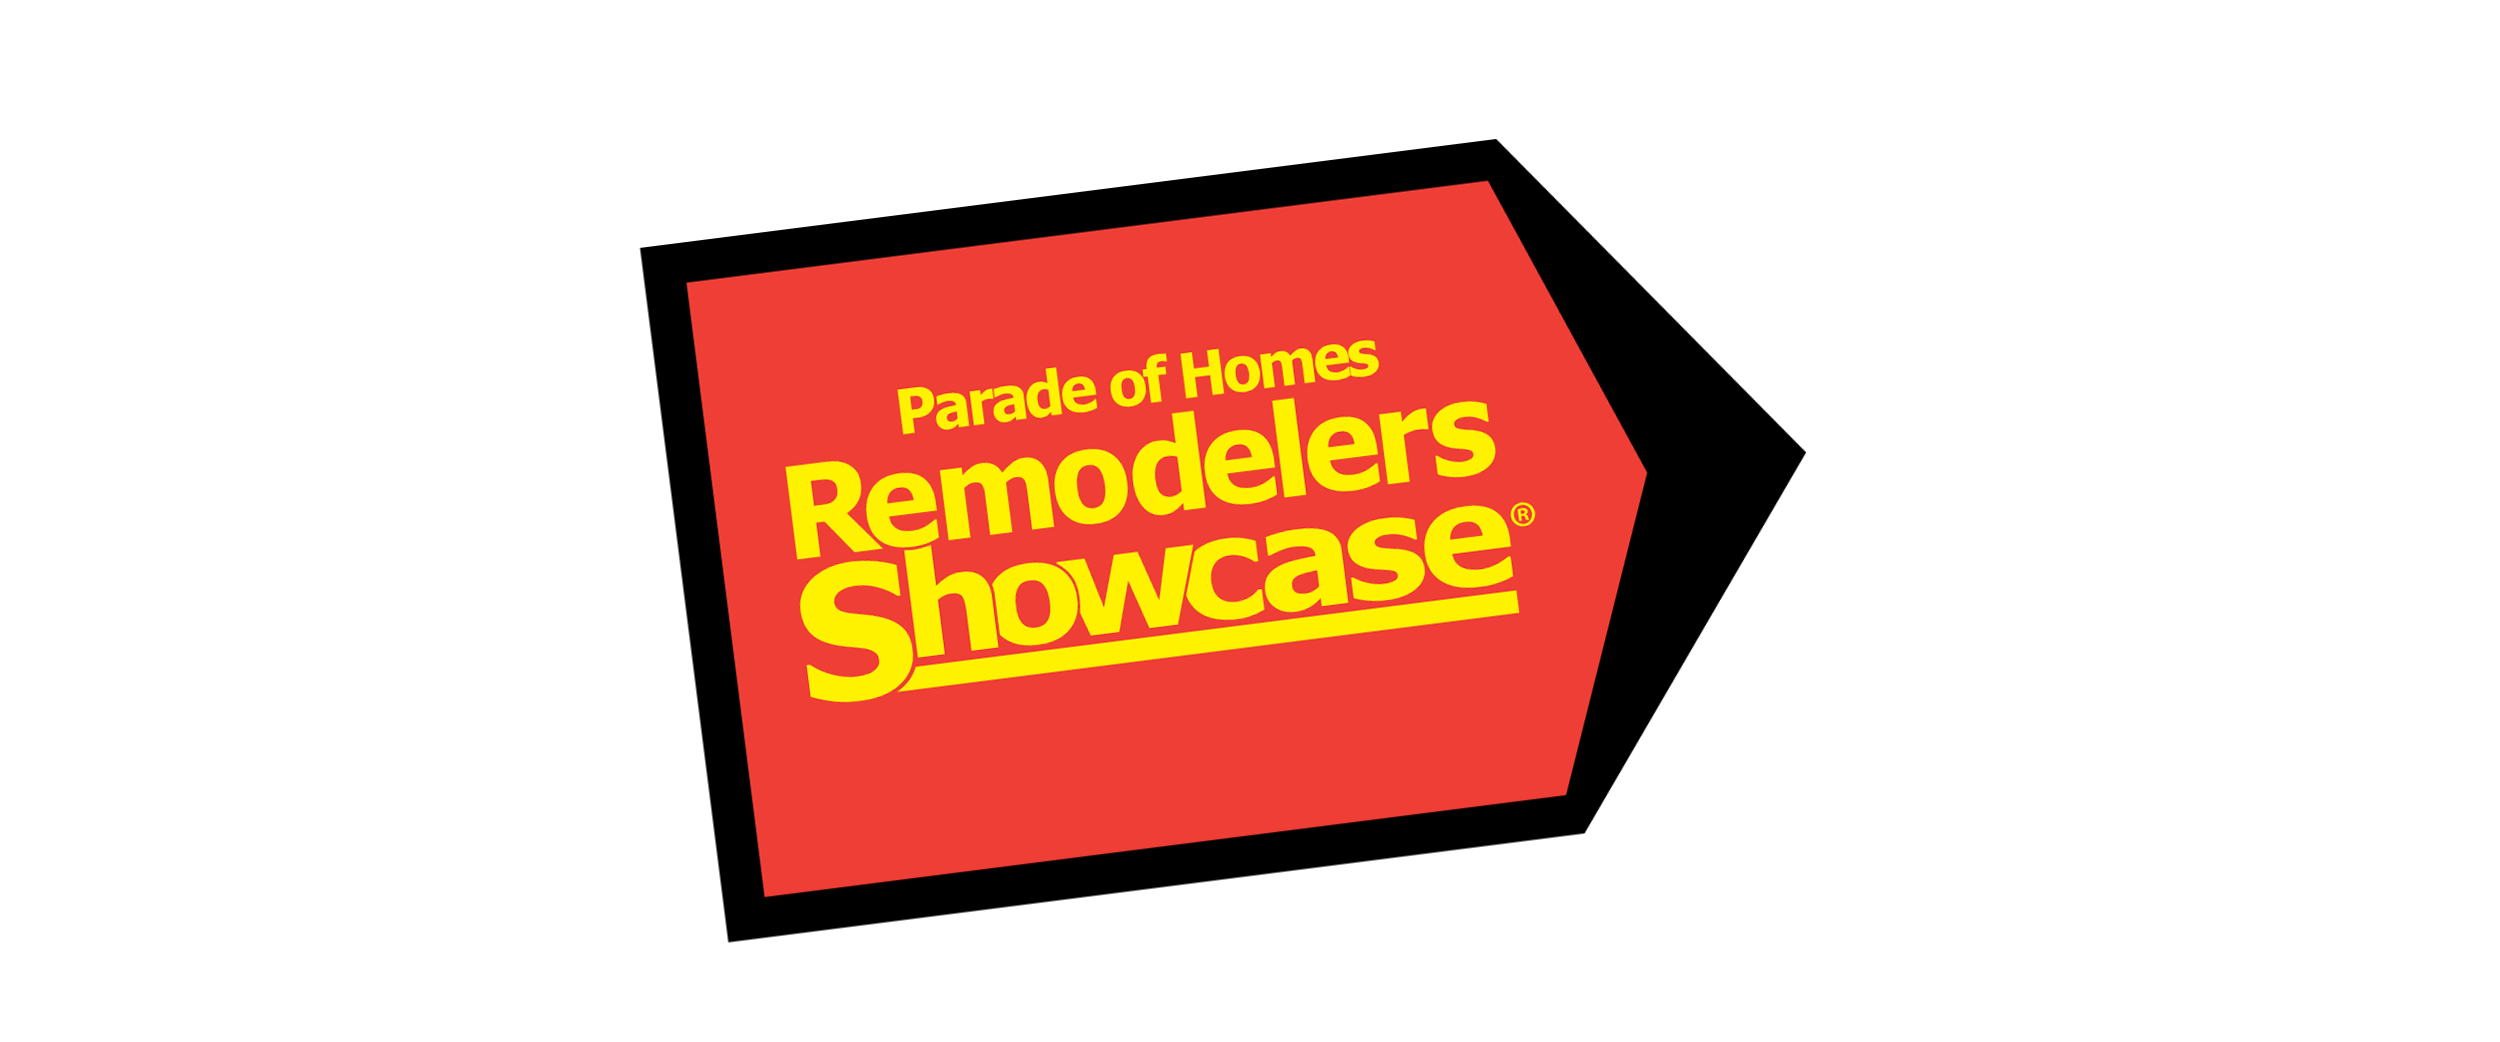 Image for Spring Remodelers Showcase Opens 34 Remodeled Homes to Tour April 8-10